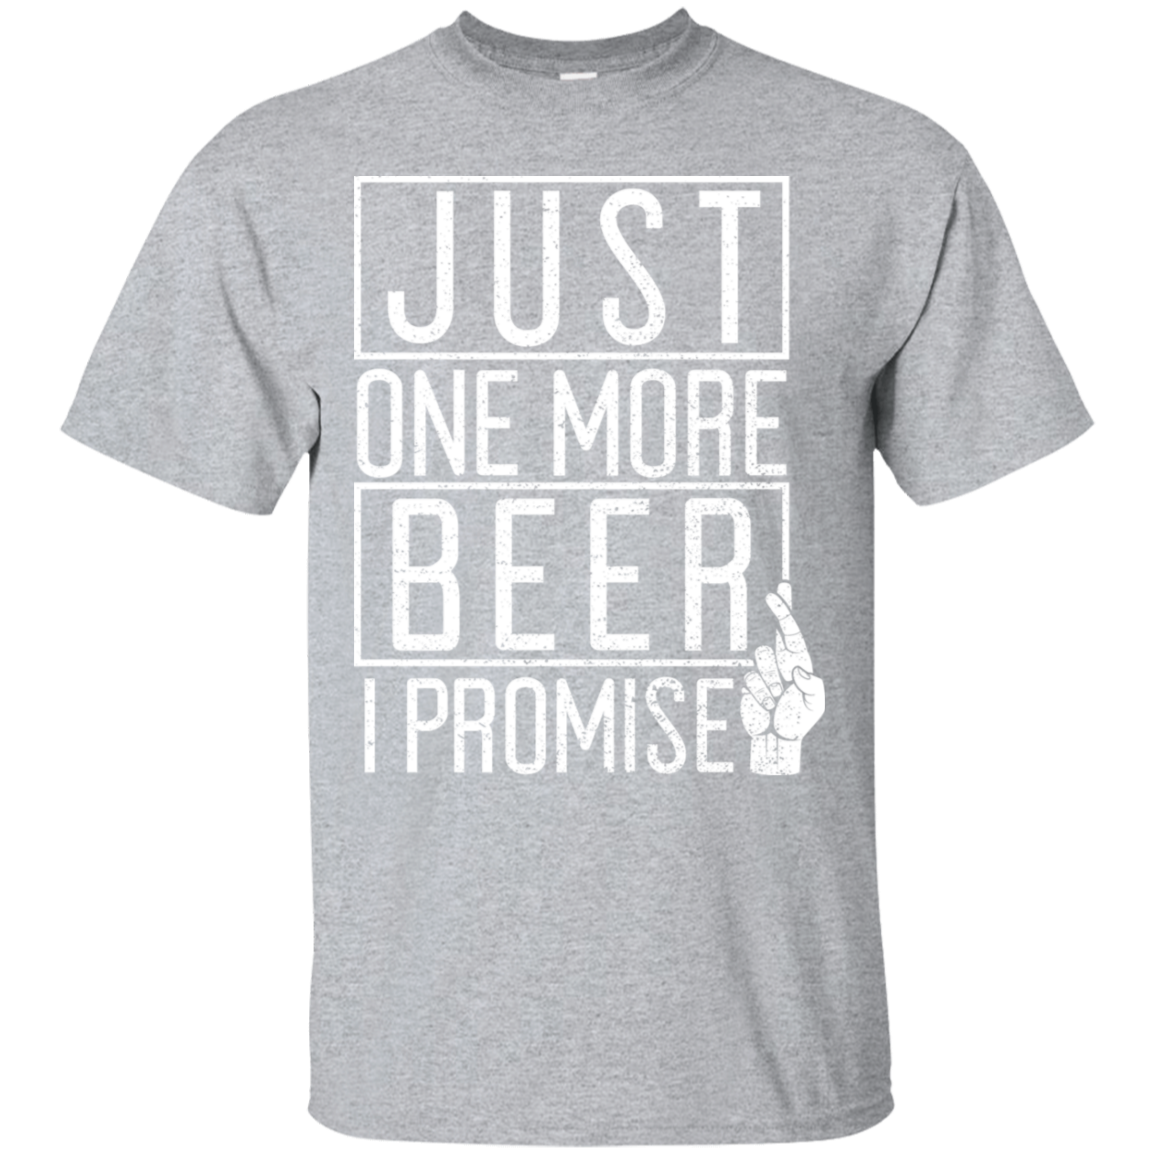 Just One More Beer I Promise T-Shirt T-Shirts - The Beer Lodge